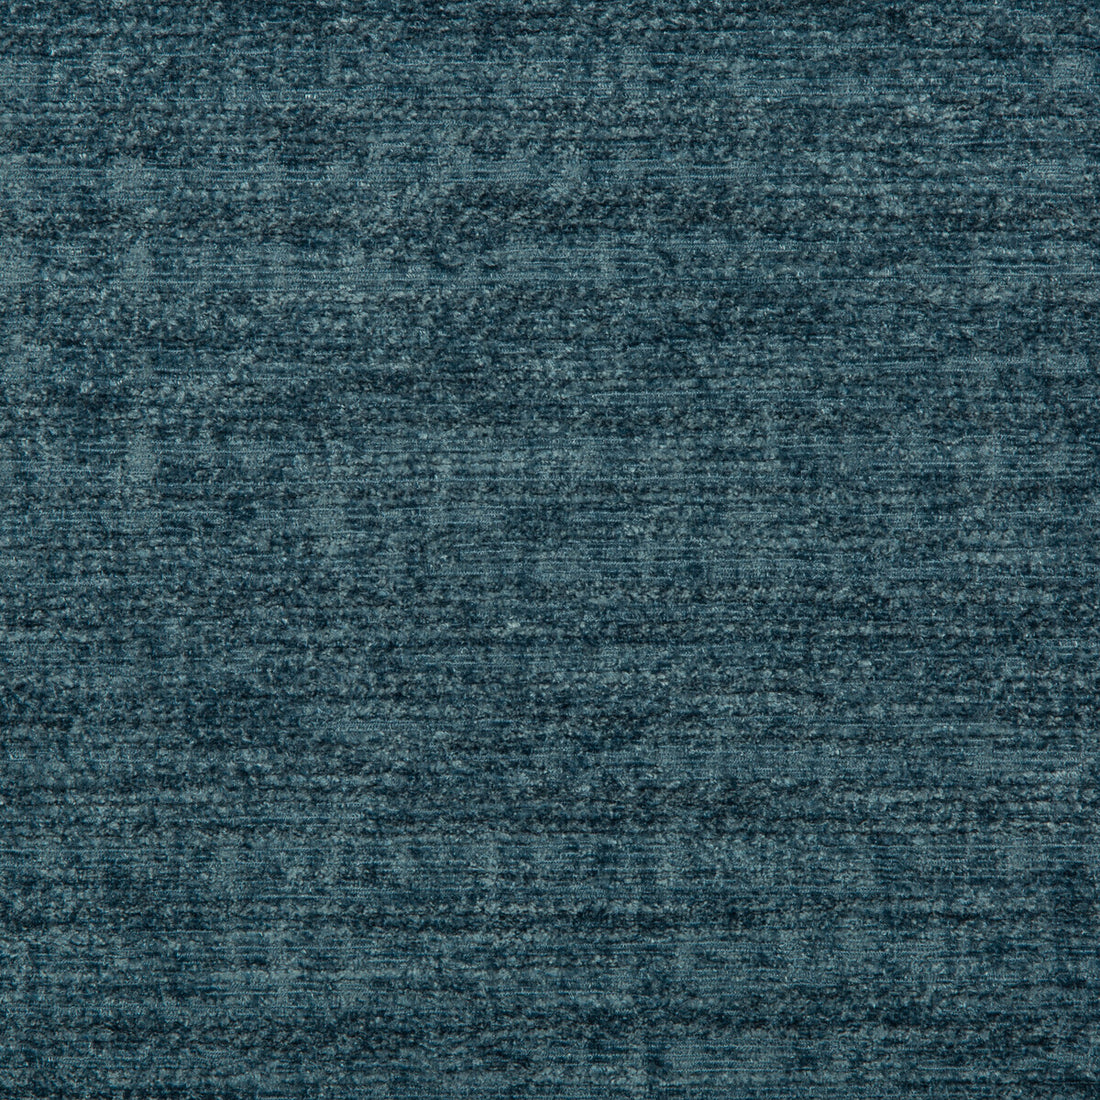 Kravet Smart fabric in 35779-5 color - pattern 35779.5.0 - by Kravet Smart in the Performance collection